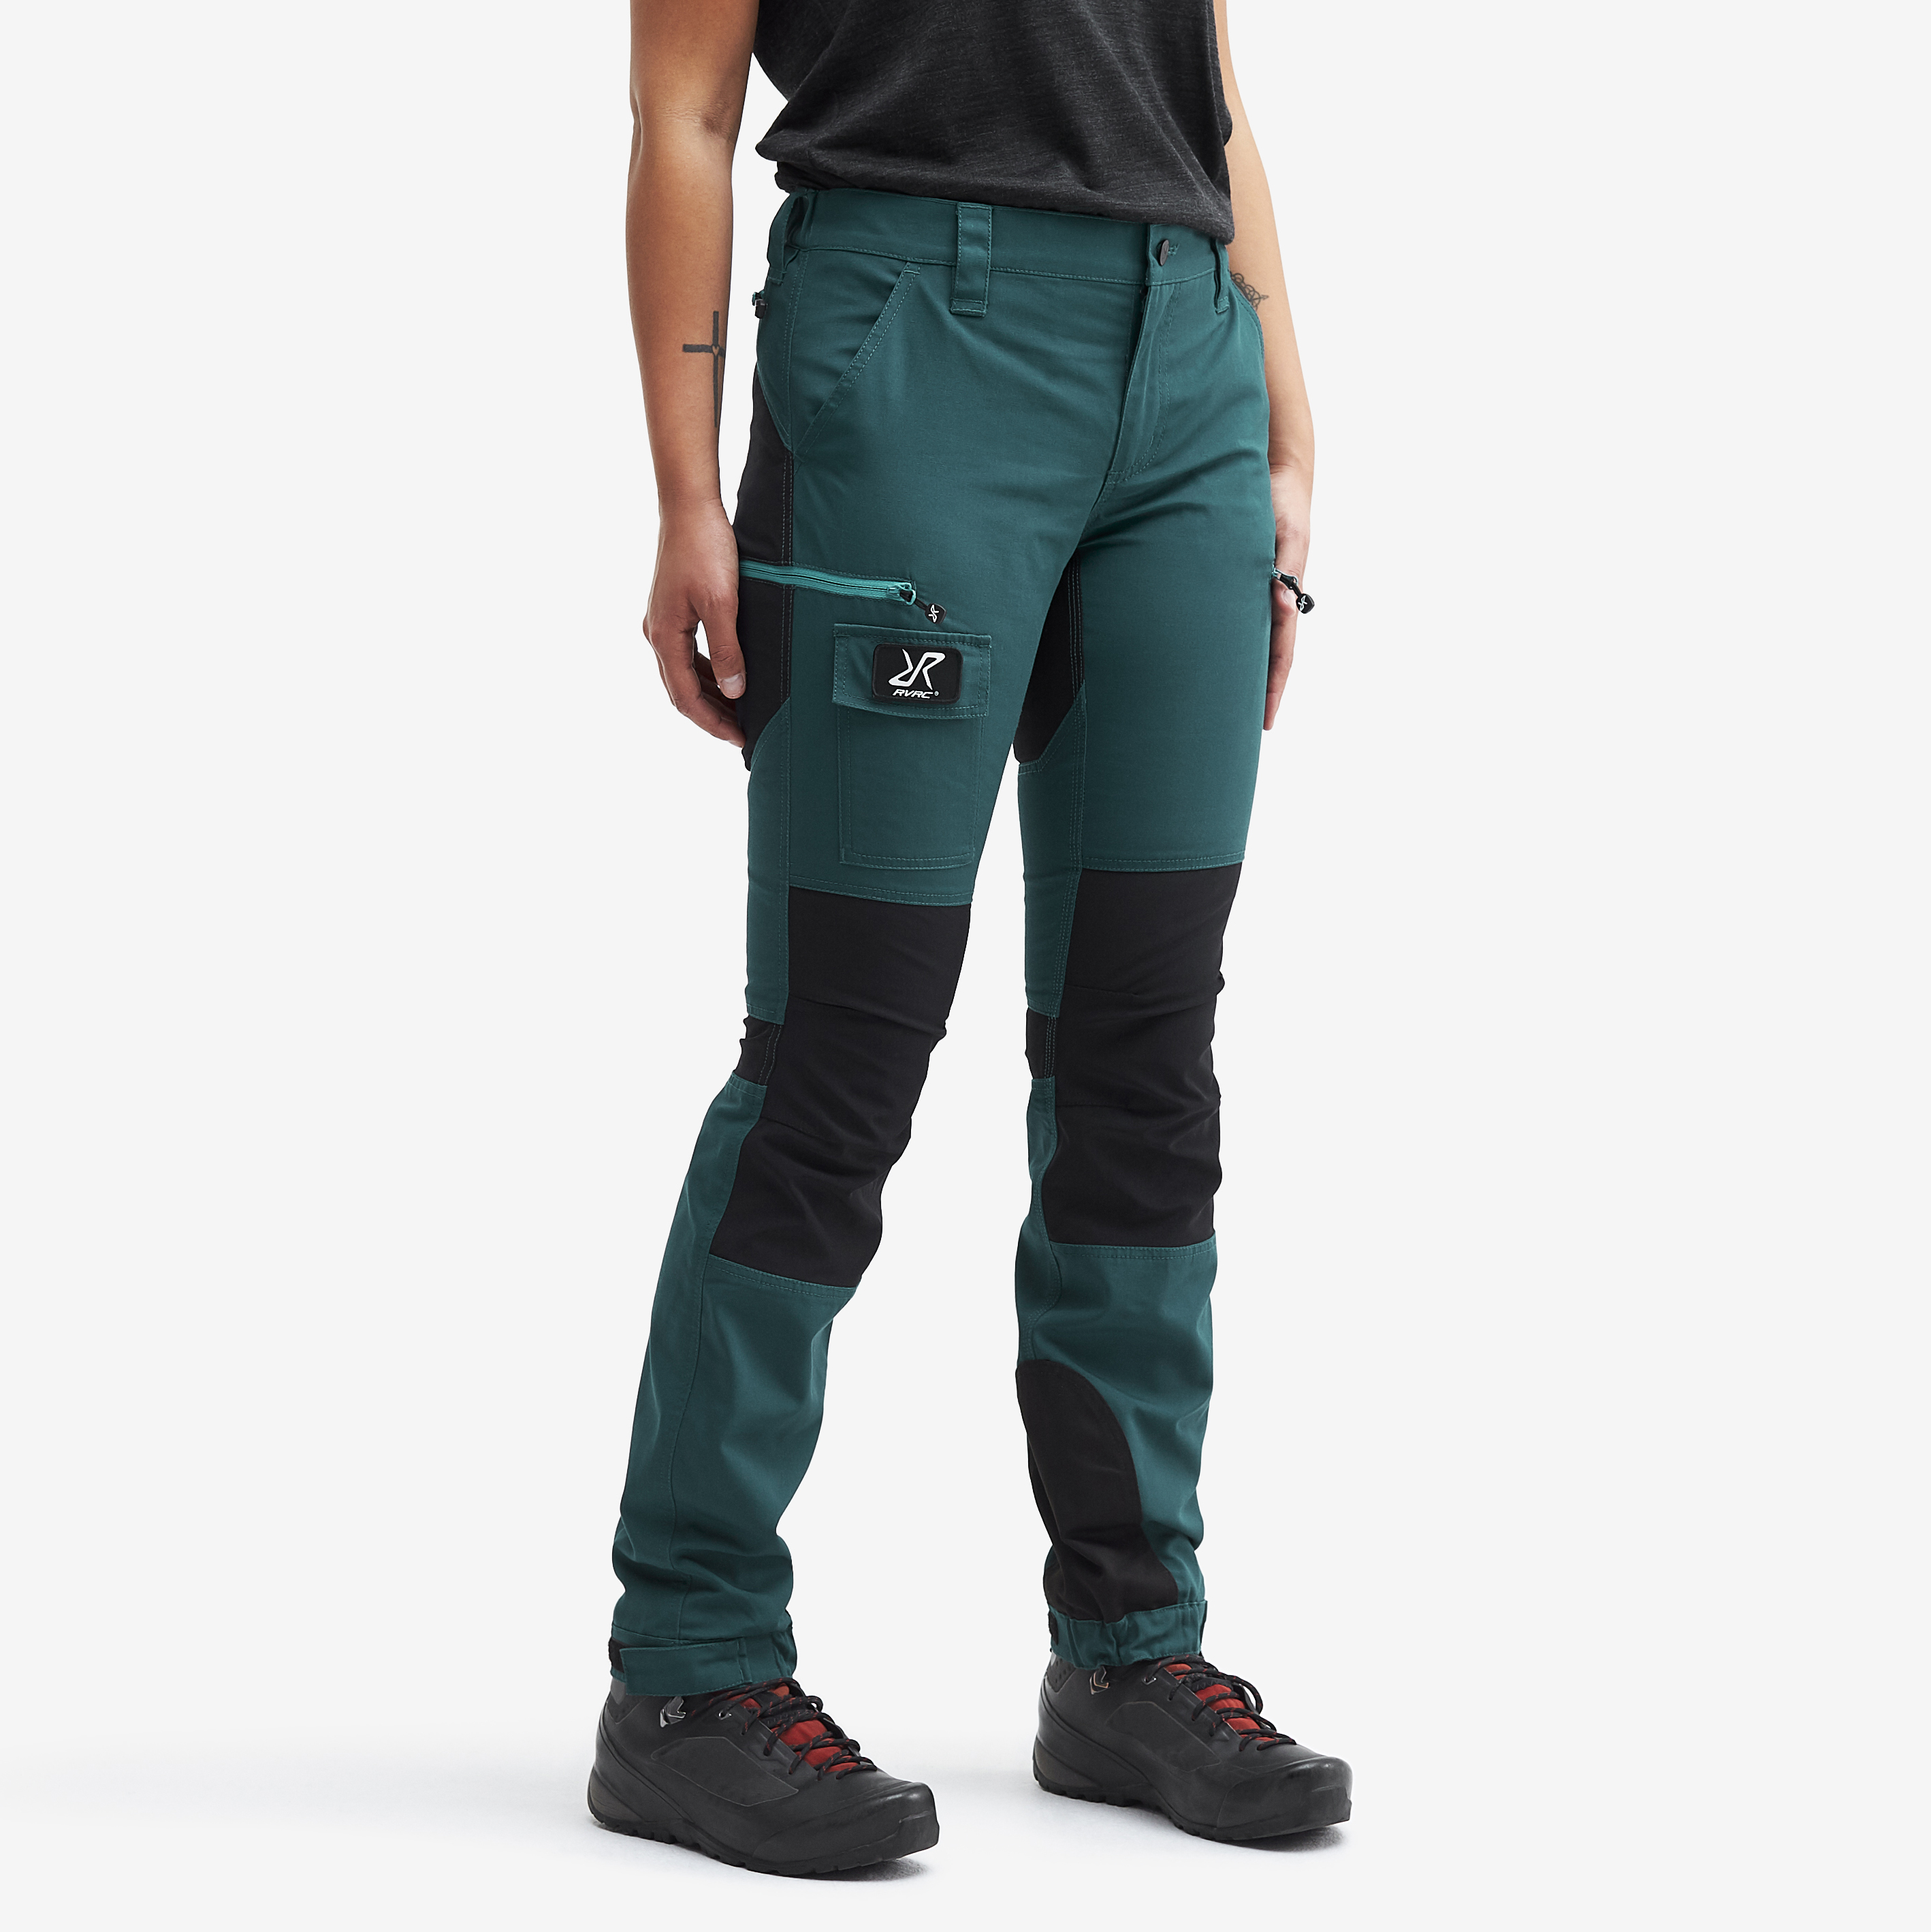 Nordwand outdoor pants for women in blue